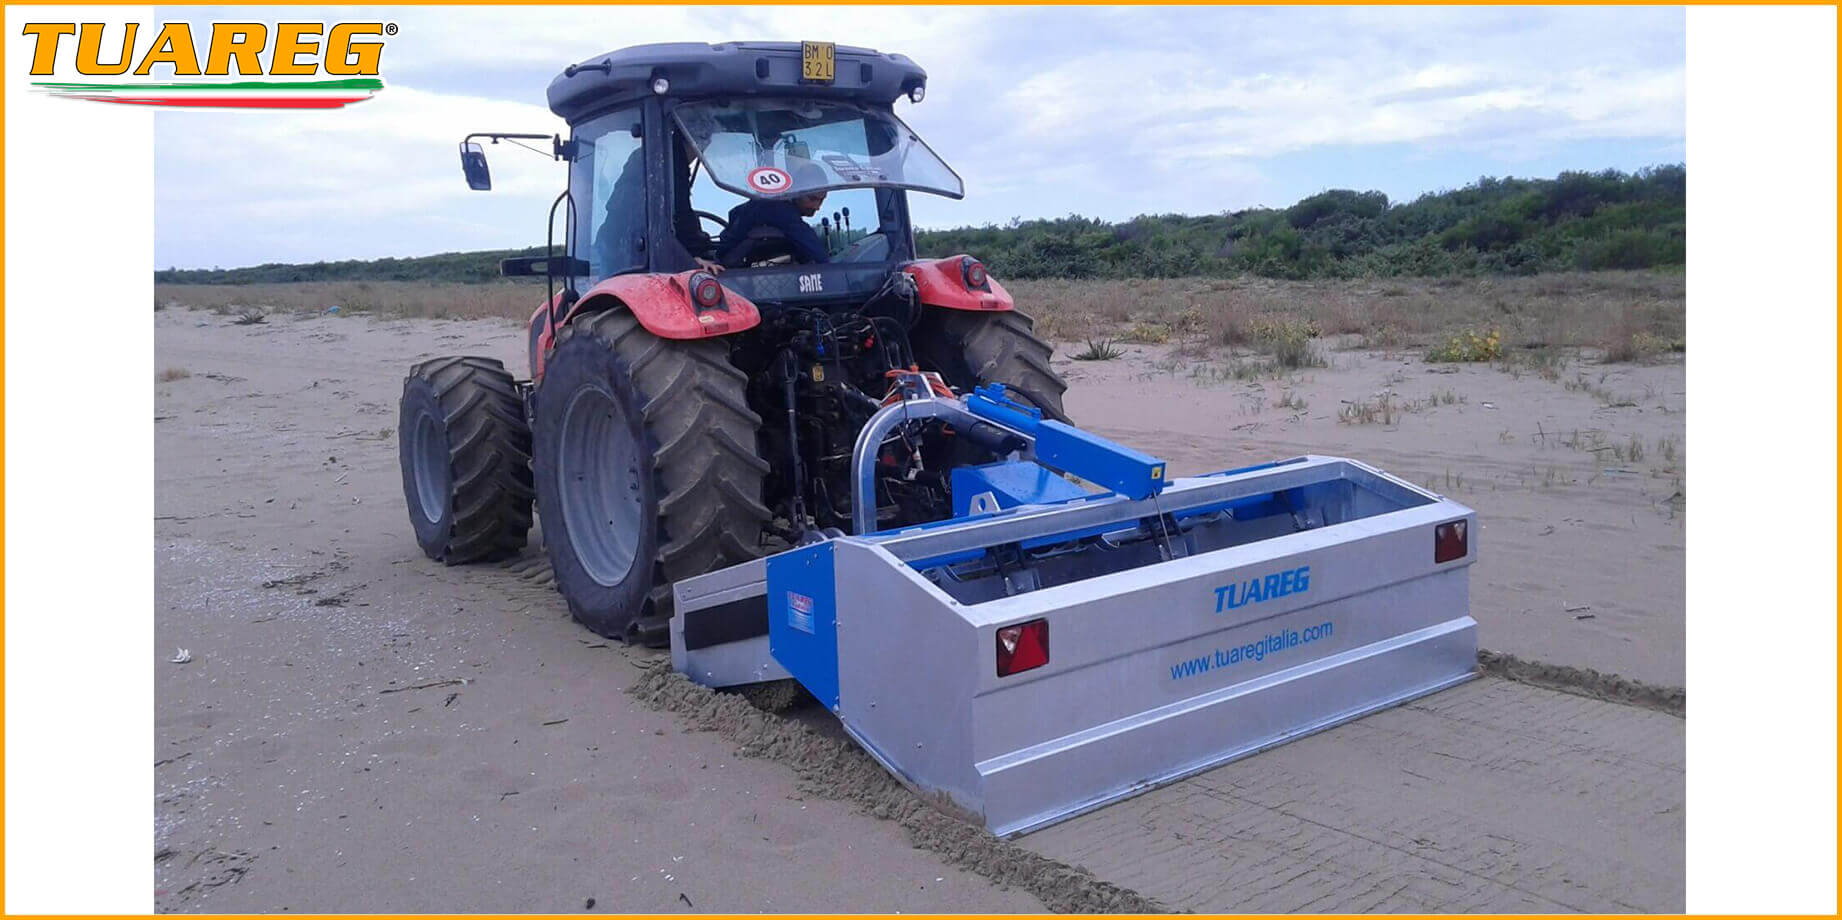 Tuareg EvoExtra - Beach Cleaning Machine - Attached to a Tractor